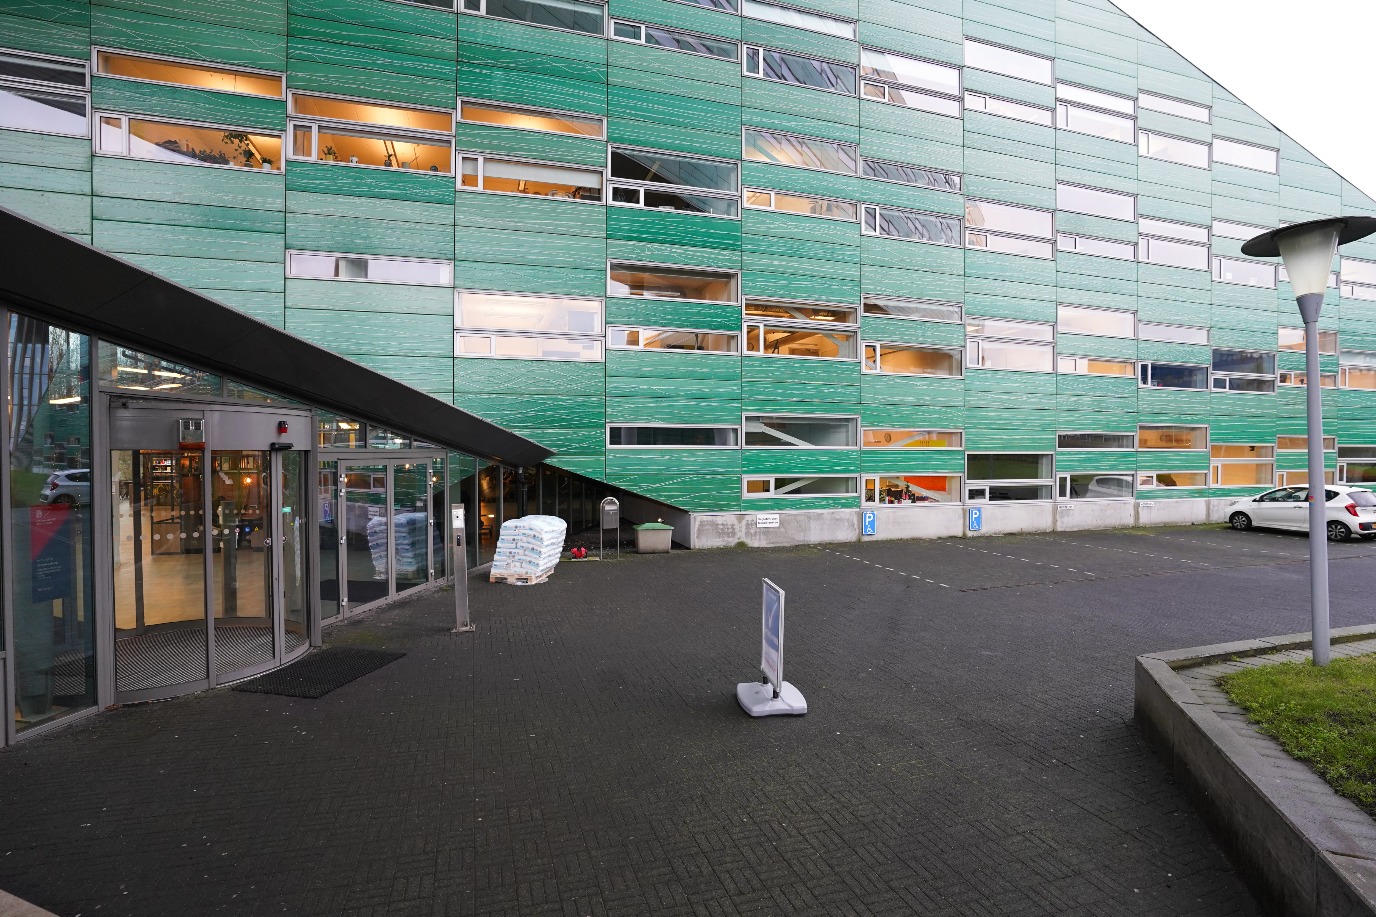 On-site parking for people with a disability, to the right of the main entrance